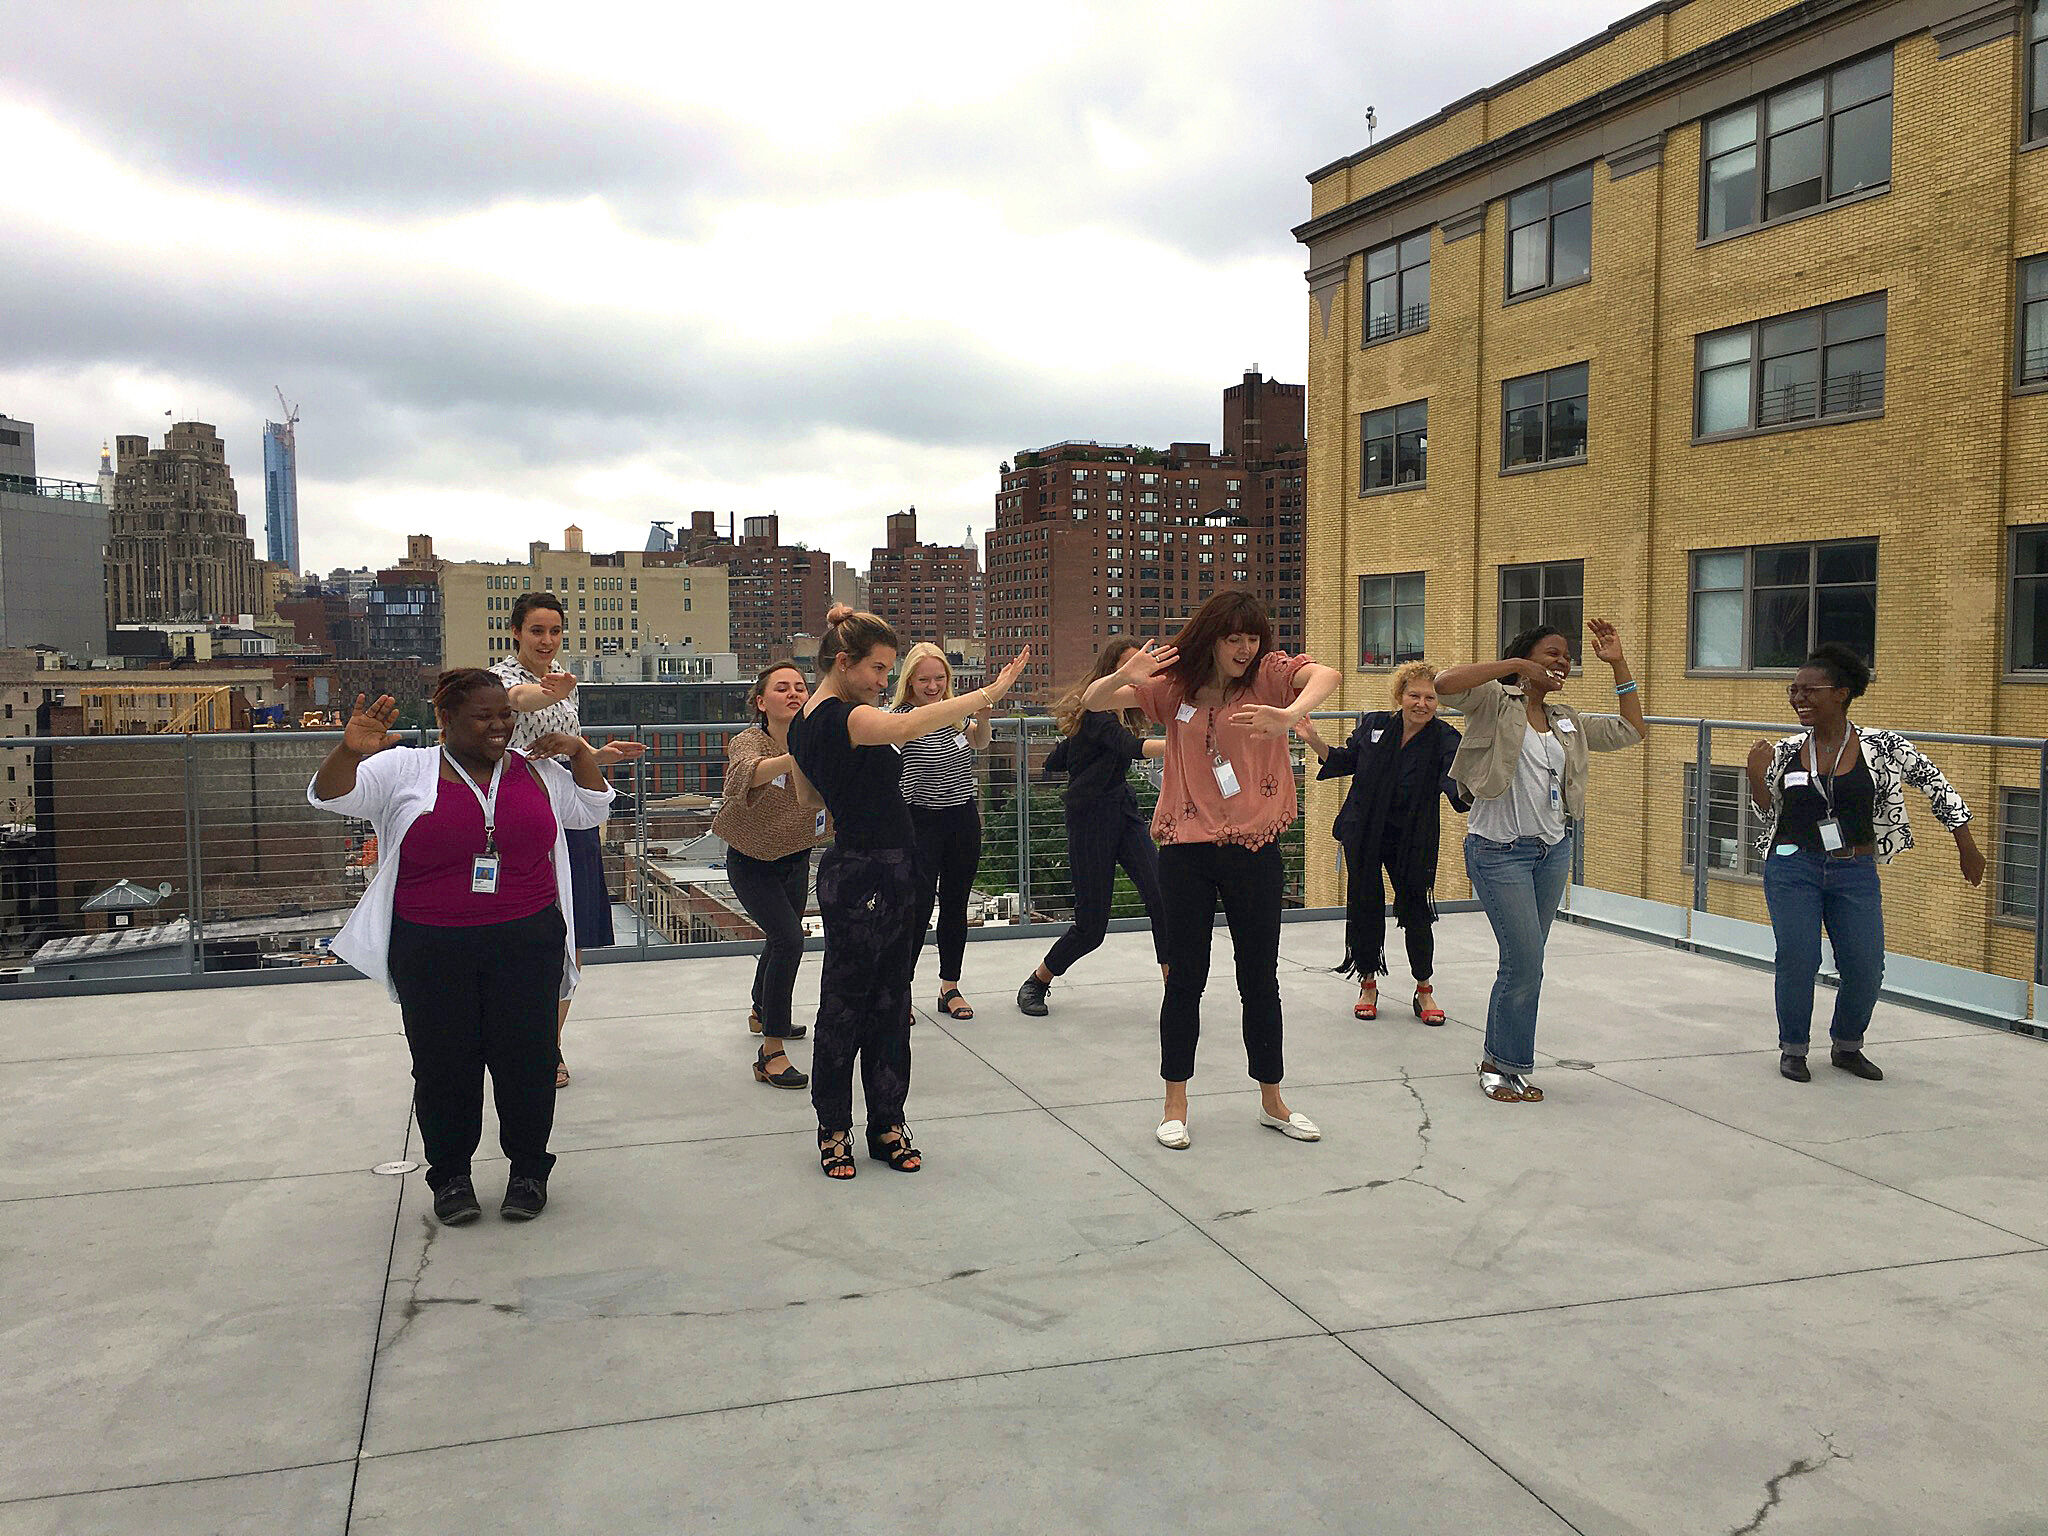 The Whitney staff shows off dance moves during the workshop